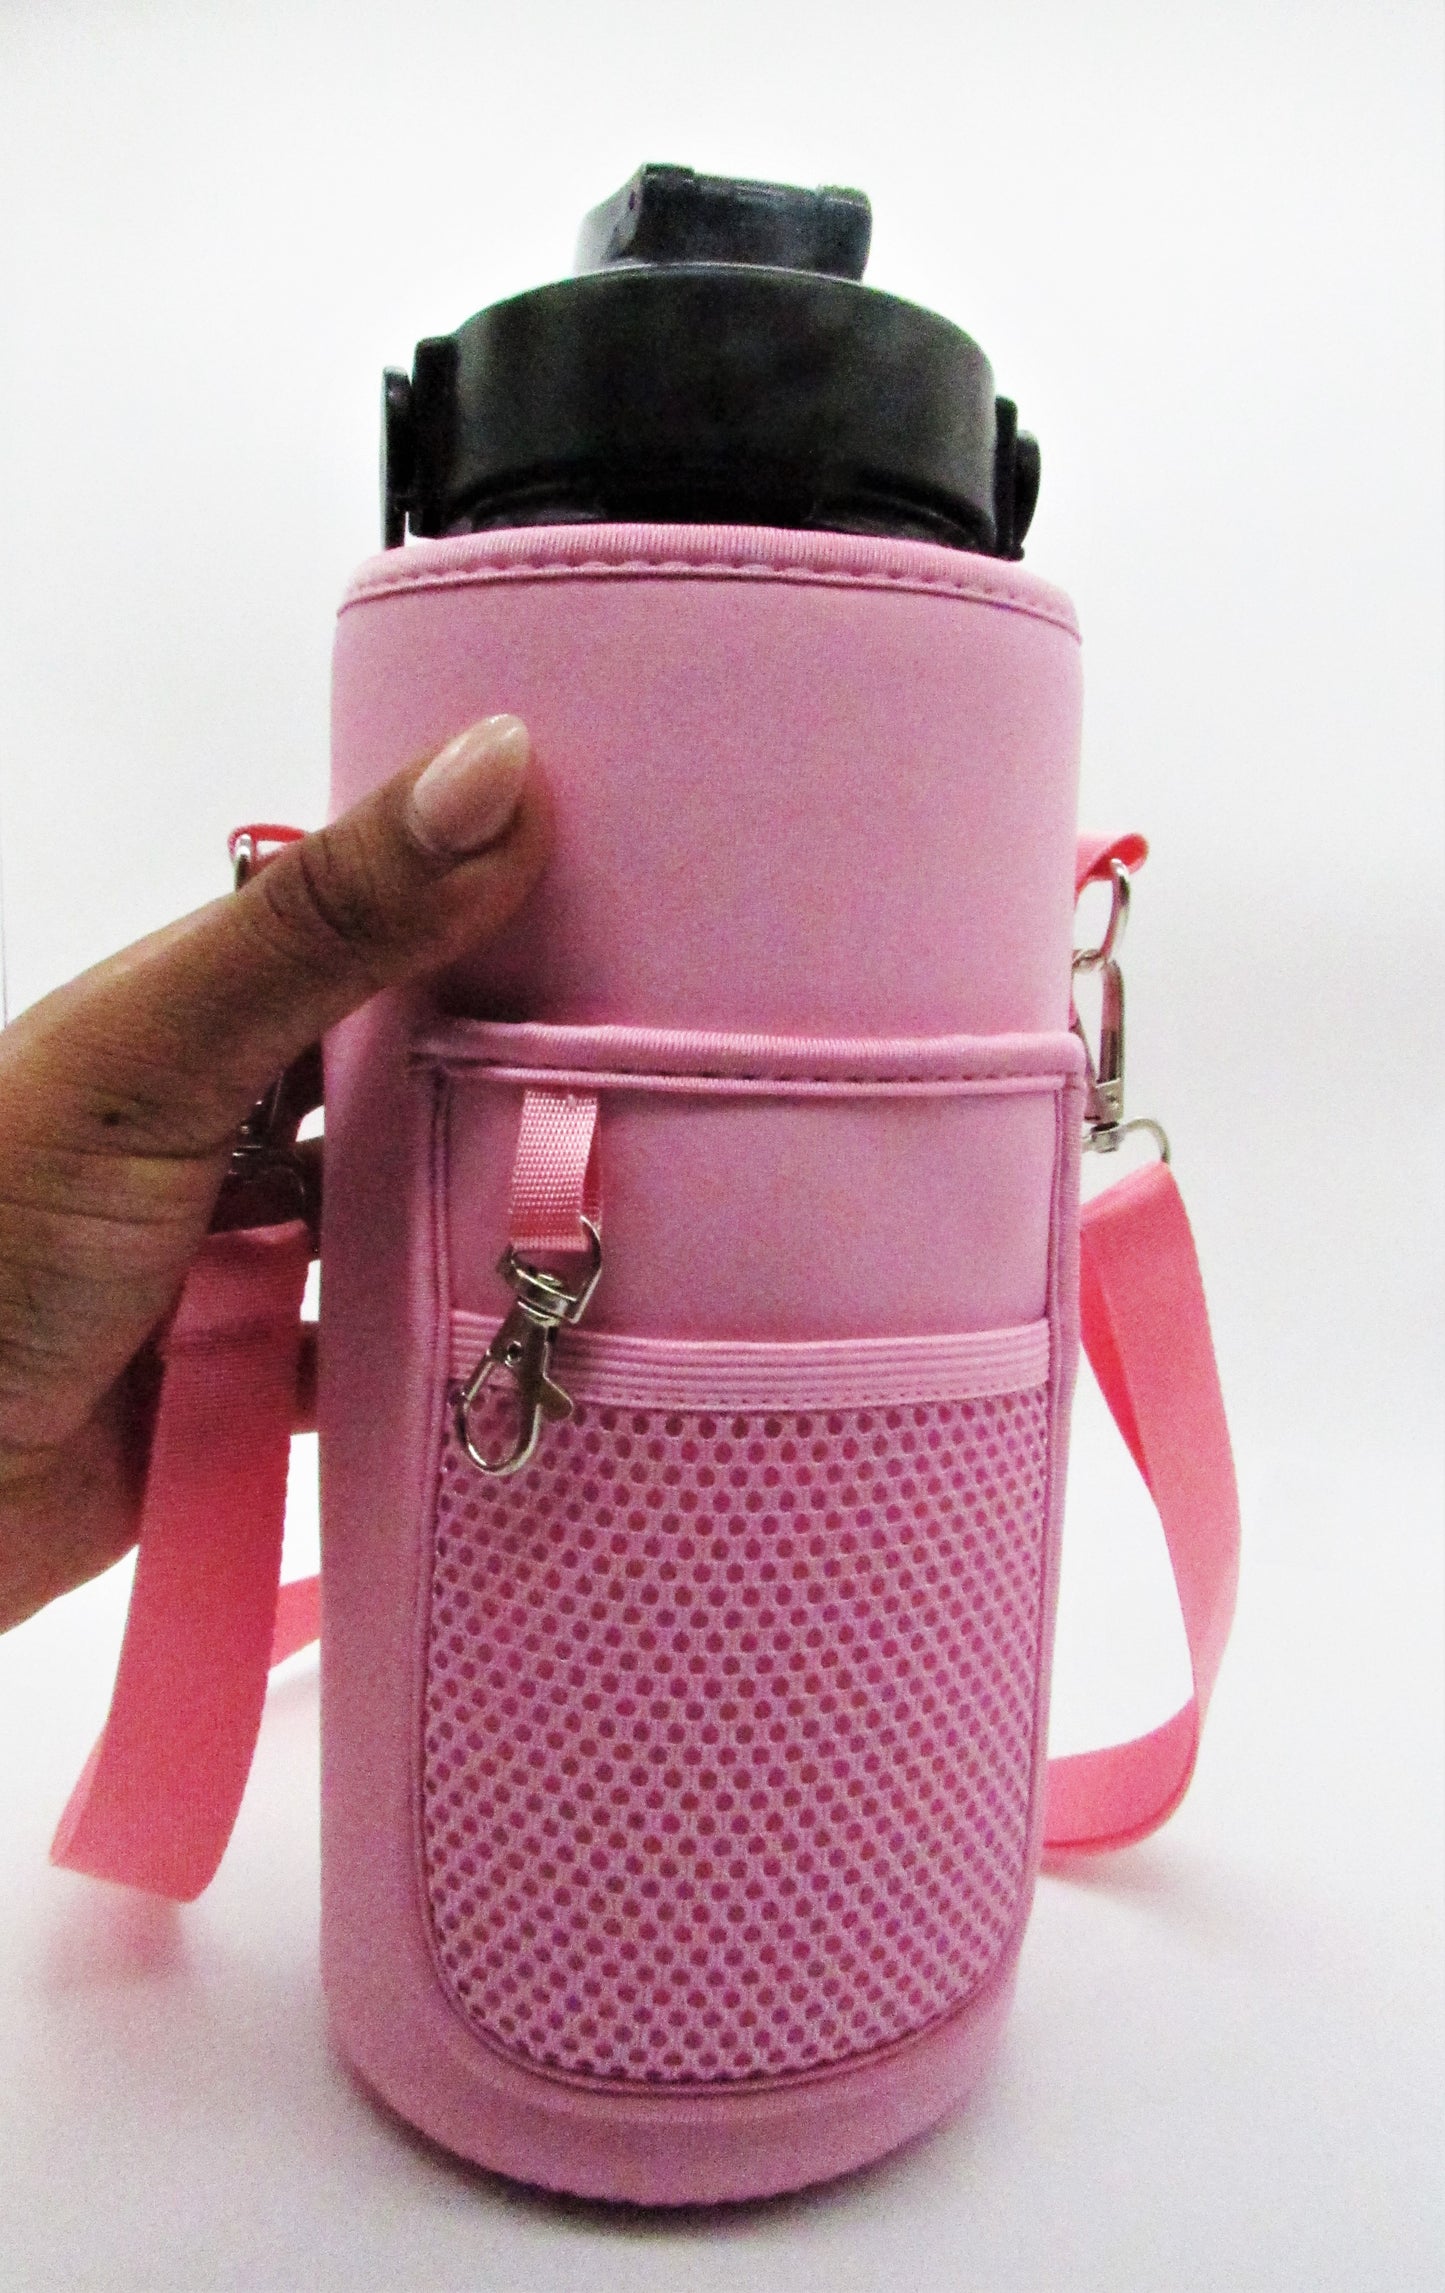 Half Gallon Water Bottle with Carry Strap, Cellphone Holder and Cellphone Pocket